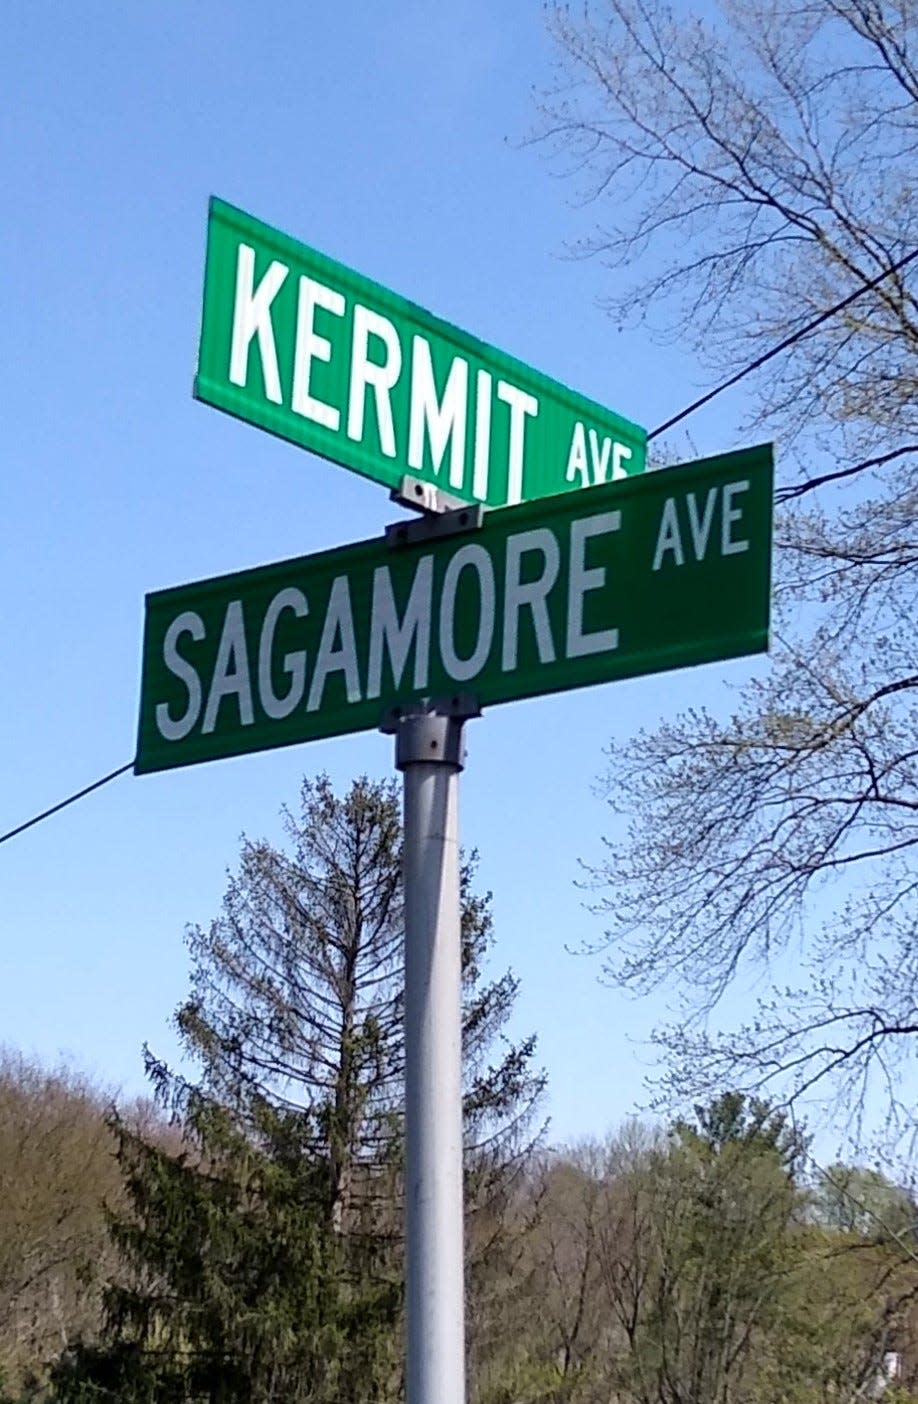 Kermit Avenue in Akron's Goodyear Heights is named for Kermit Roosevelt, a son of President Theodore Roosevelt. Sagamore Avenue is named for Sagamore Hill, the Roosevelt home in Oyster Bay, New York.